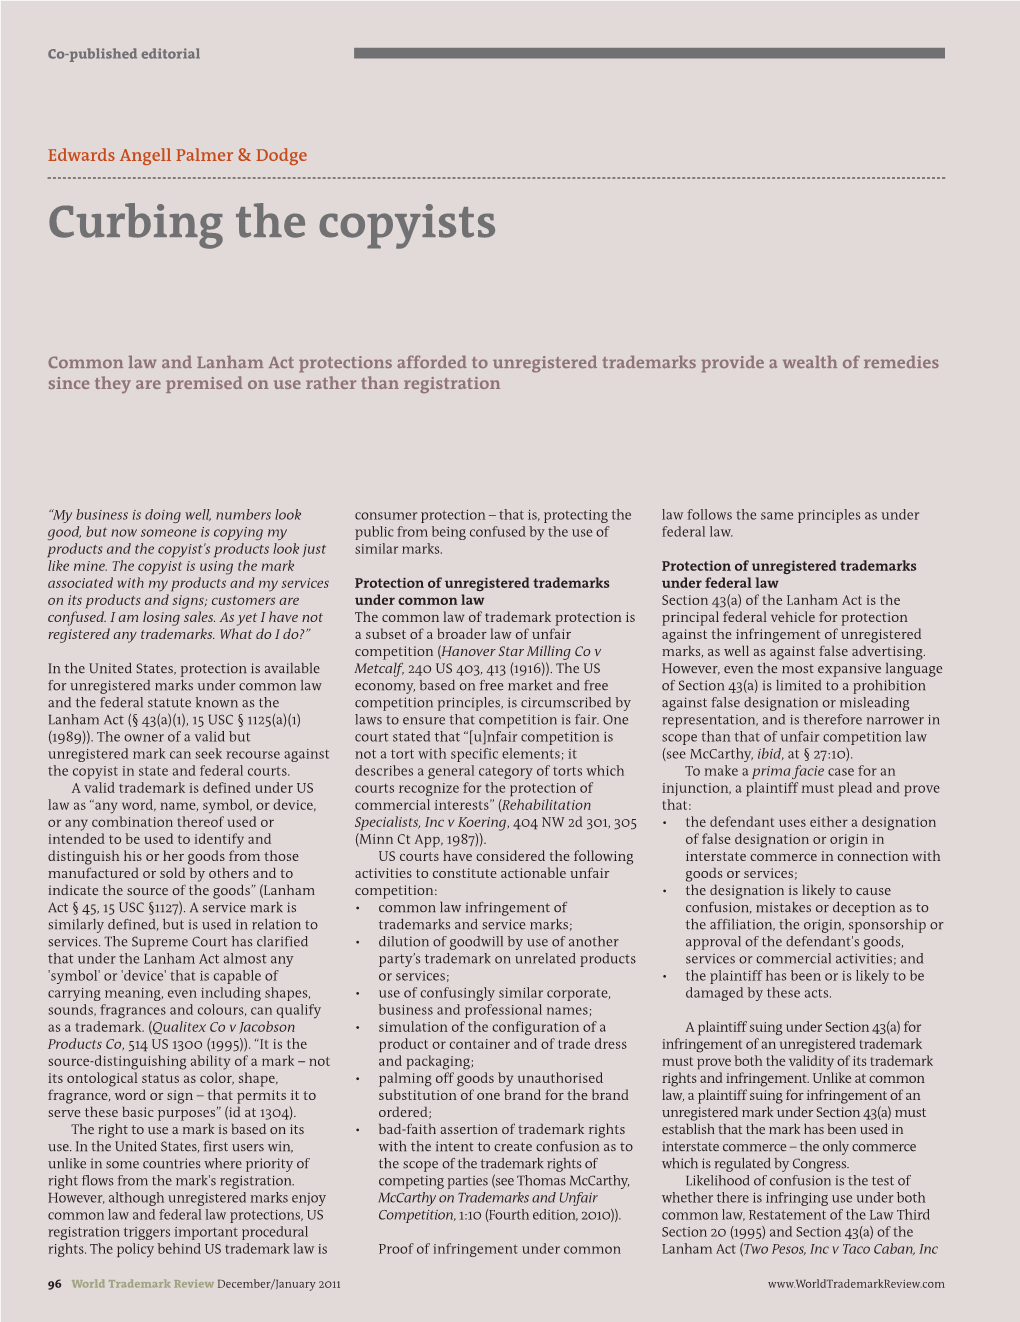 Curbing the Copyists